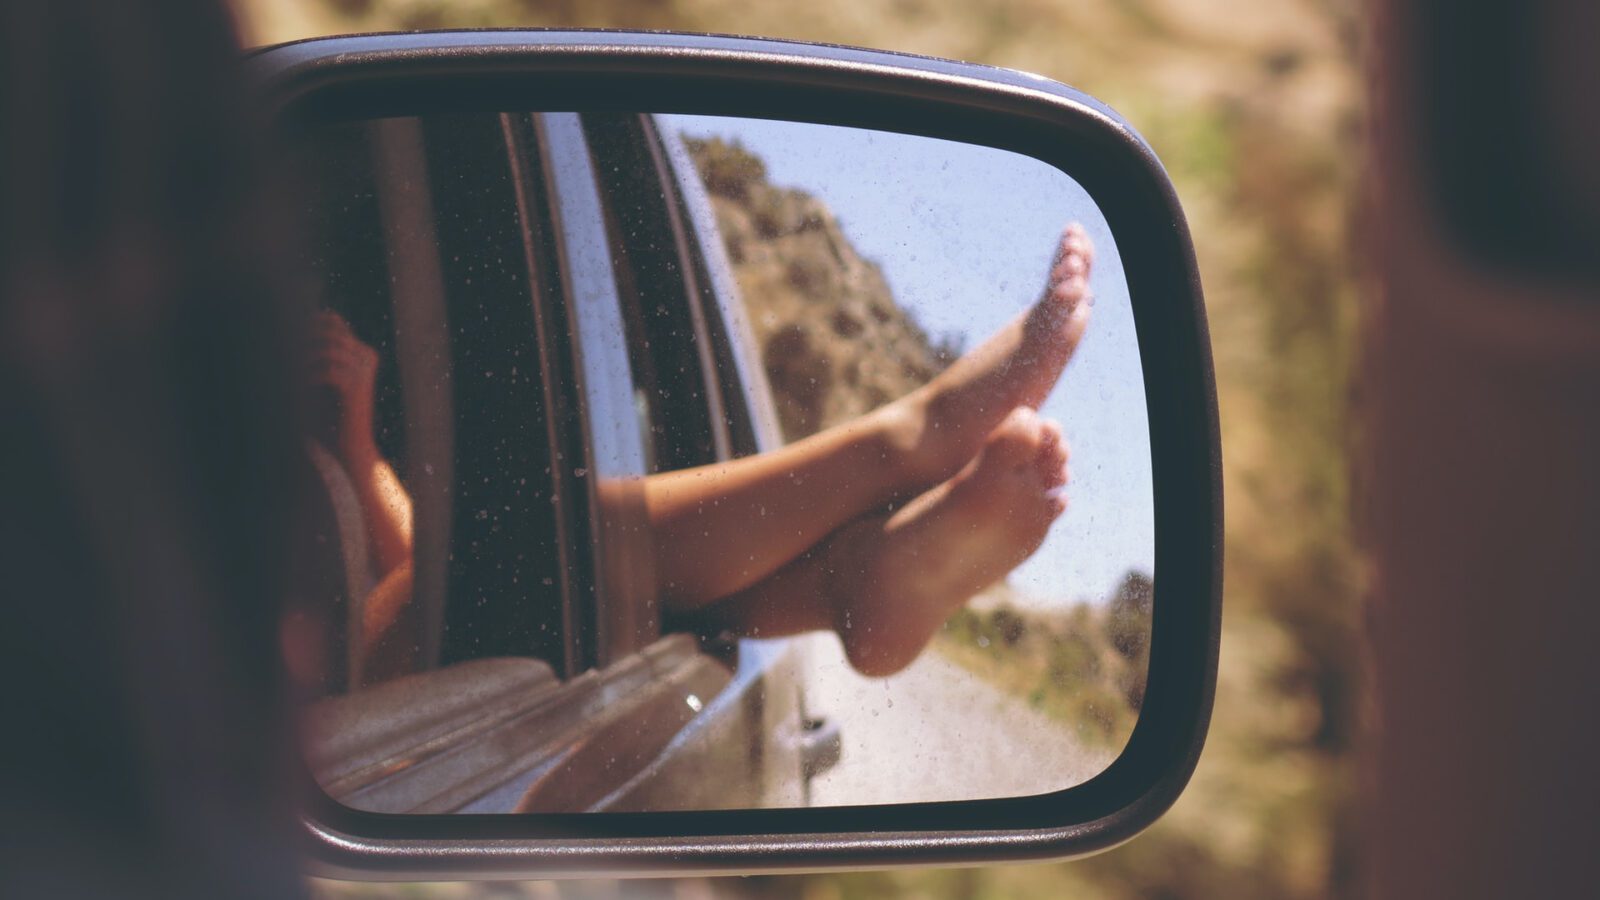 feet sticking out of car window, seen in side-view mirror